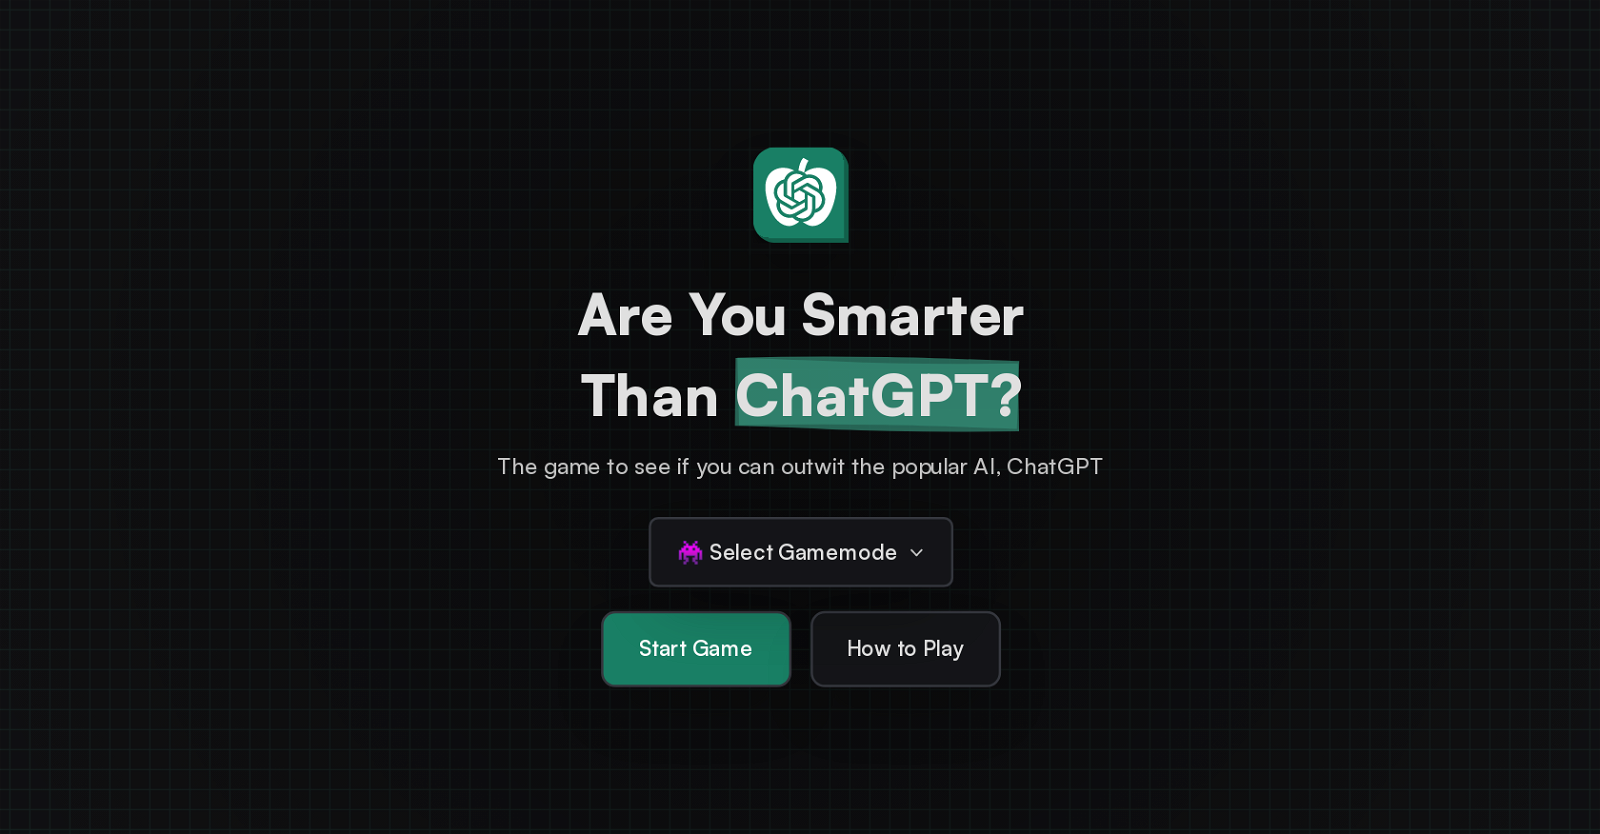 Are You Smarter Than ChatGPT? website